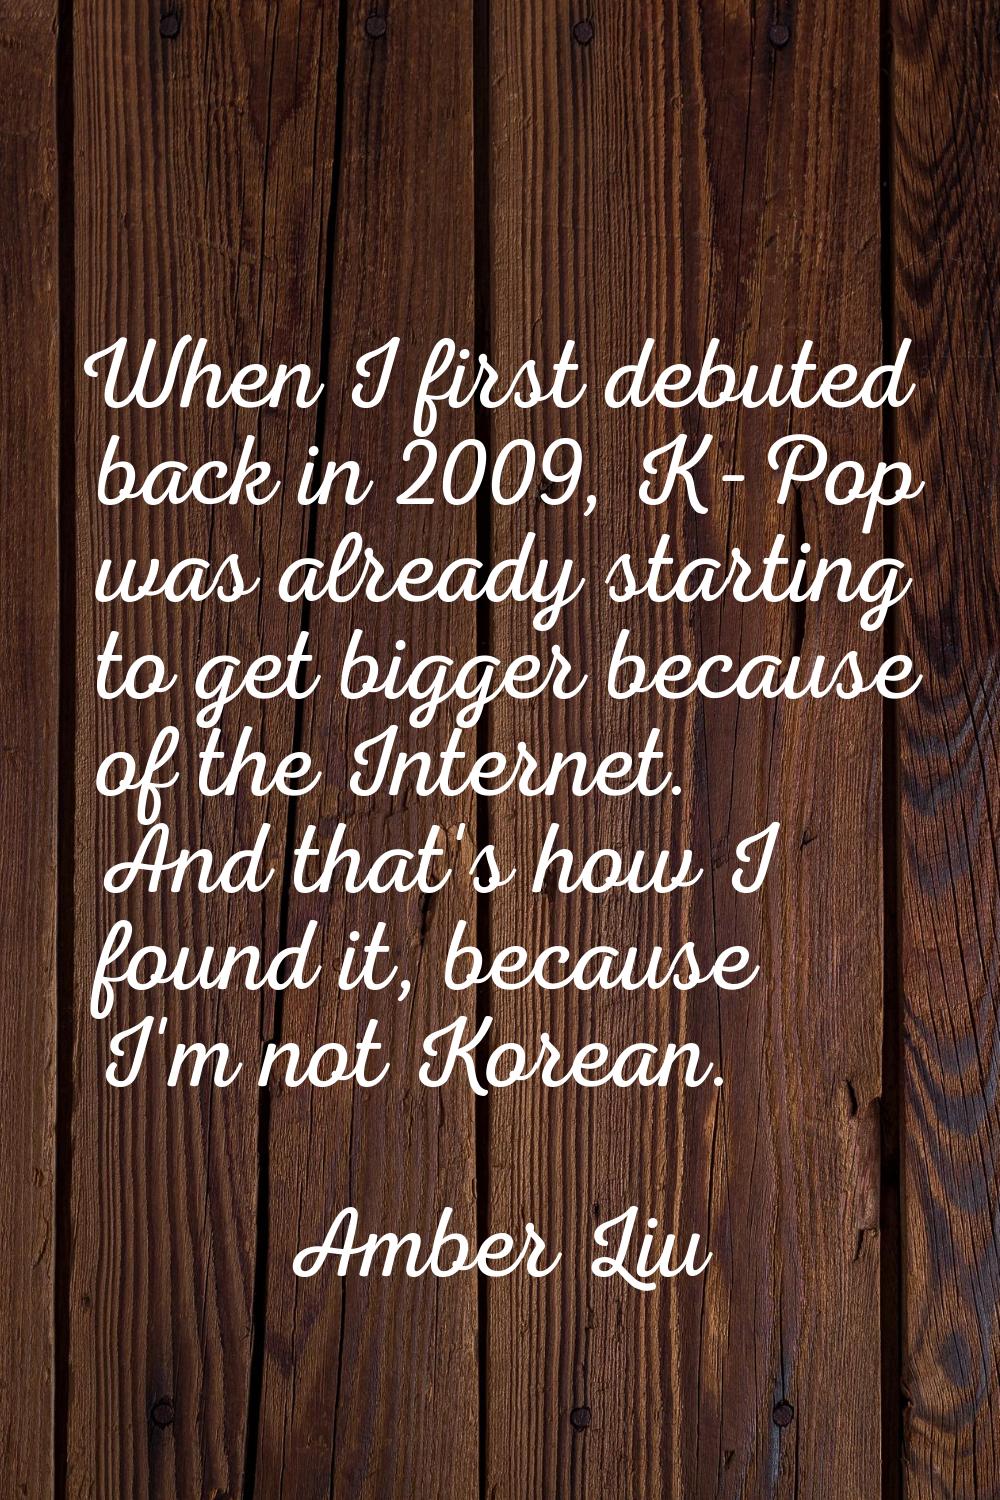 When I first debuted back in 2009, K-Pop was already starting to get bigger because of the Internet